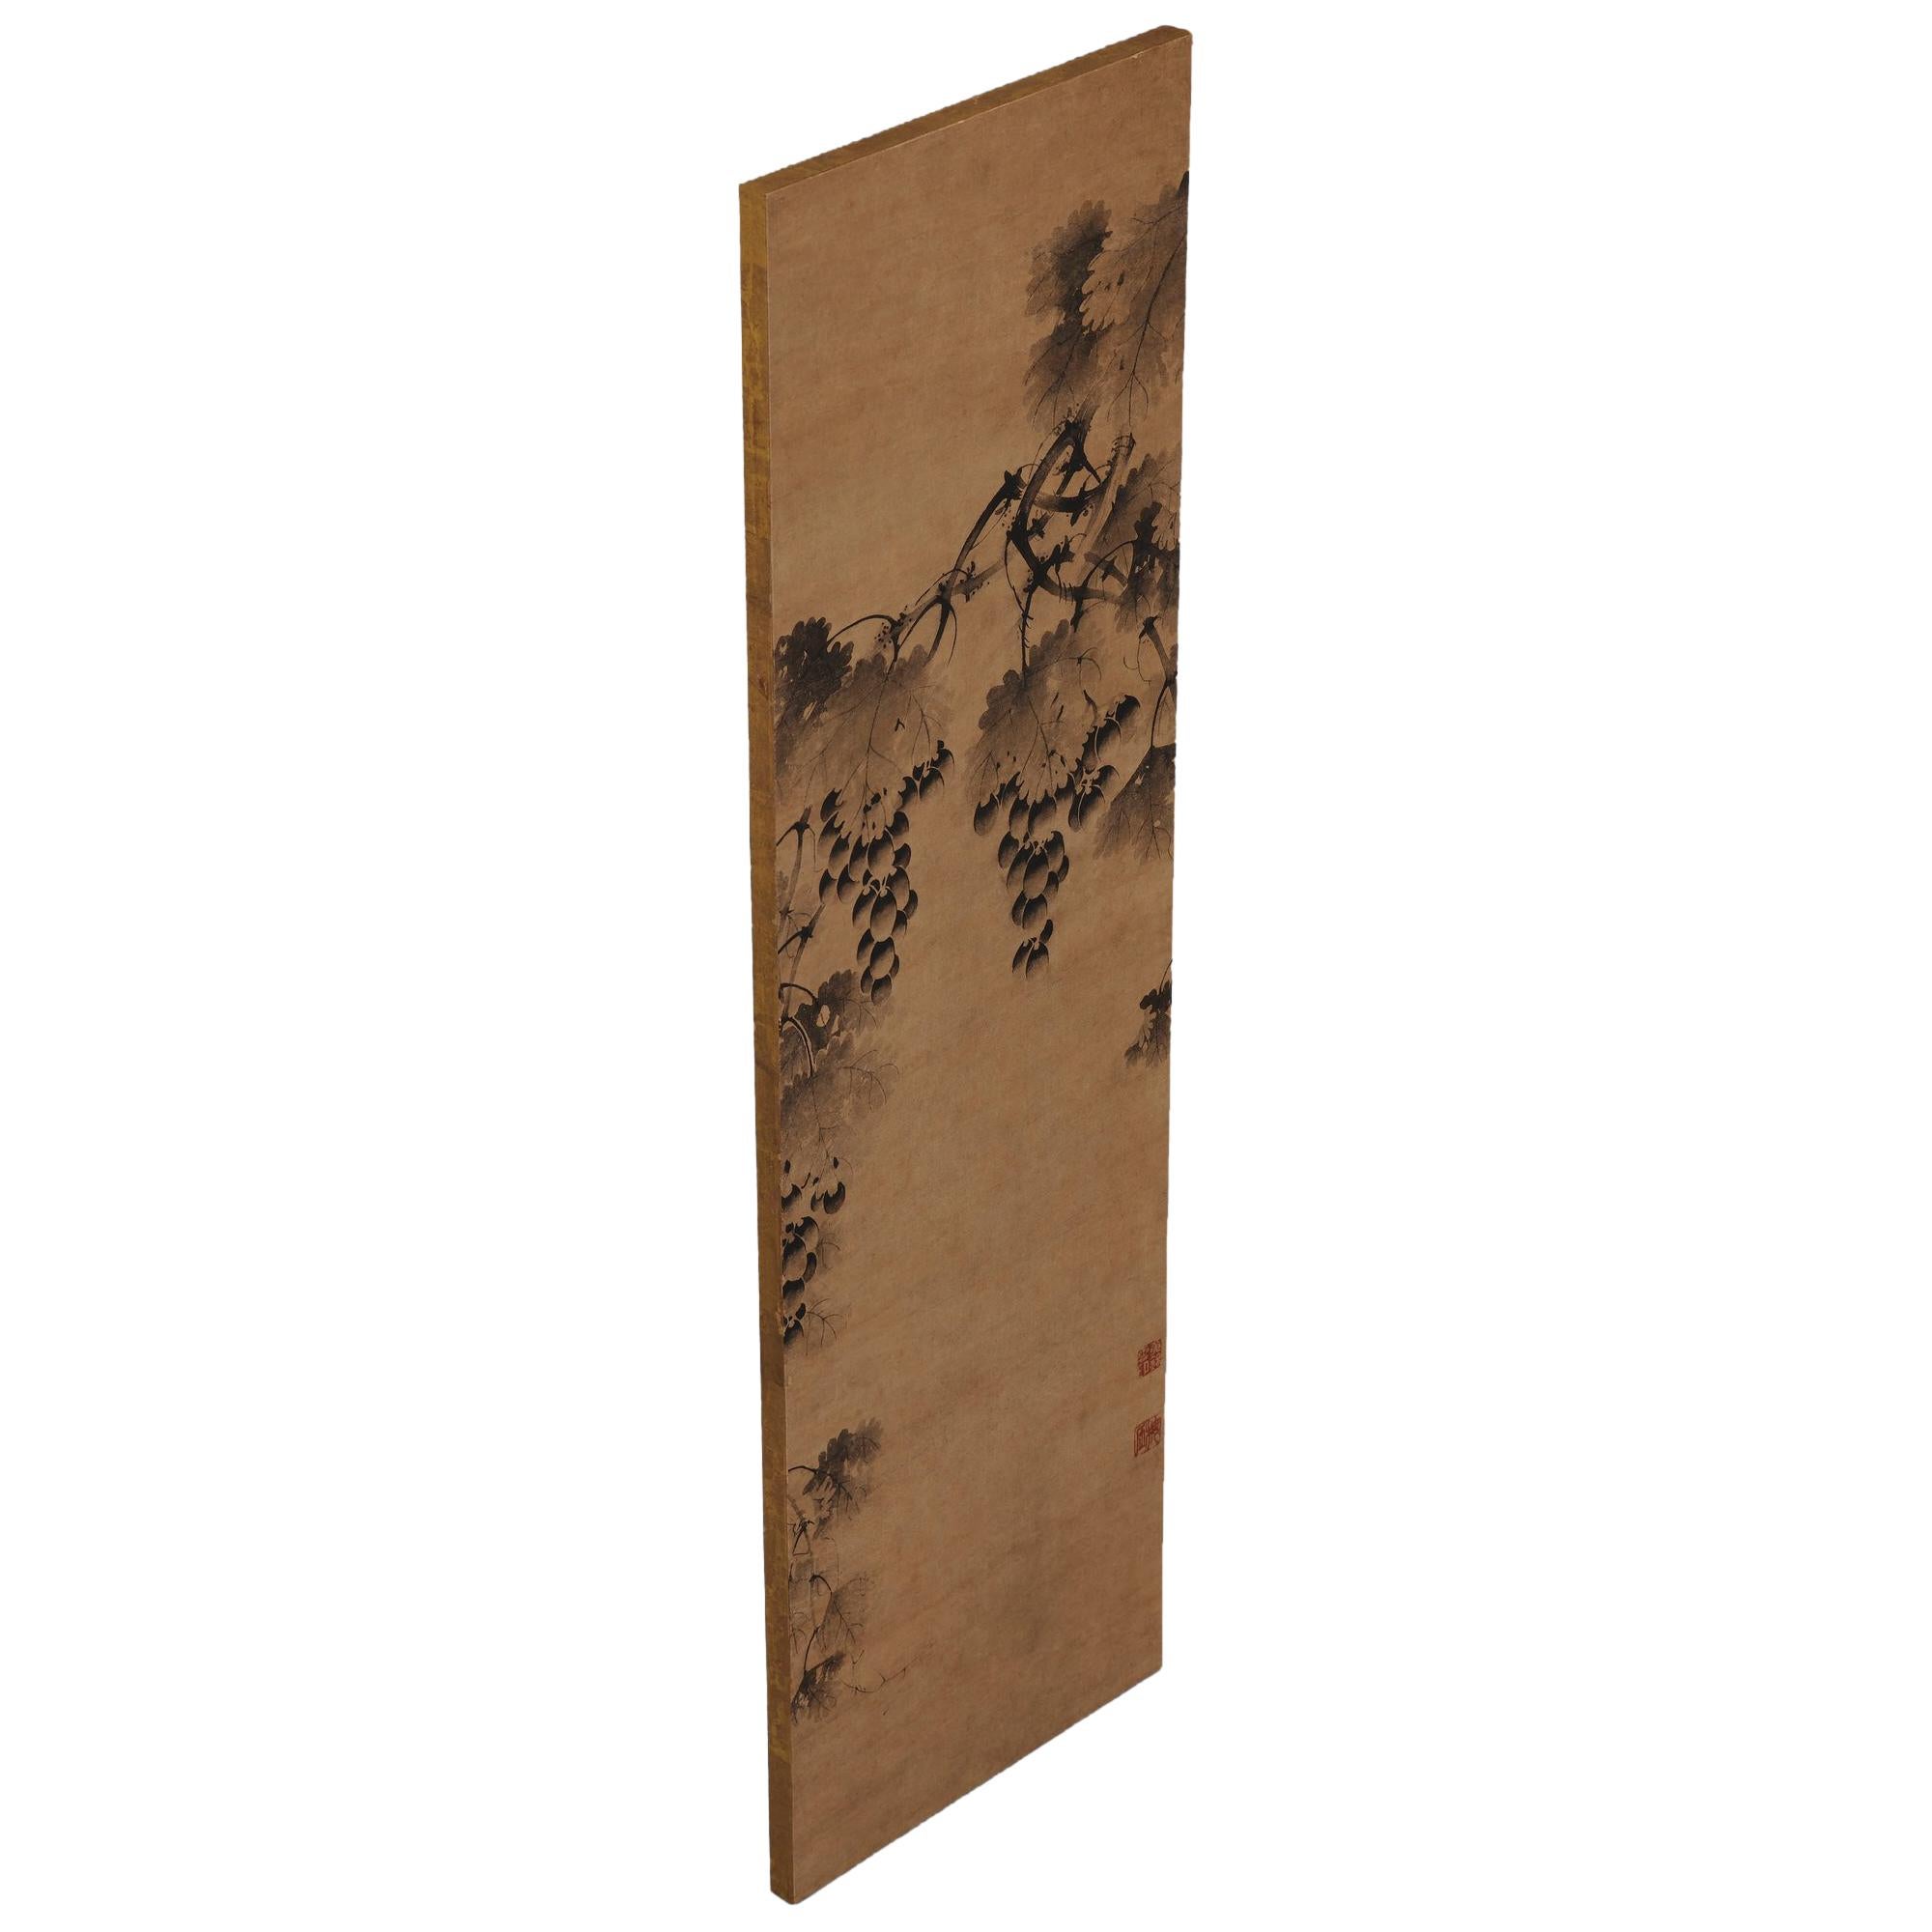 Grapevine

Anonymous. Korean, 17th century.

Wall panel, ink on paper.

Upper seal:

Kou Kinun in

Lower seal:

Kaigen

Dimensions:

Measures: 98.5 cm x 29.5 cm (39” x 11.5”).

The painting is mounted on a strong, lightweight